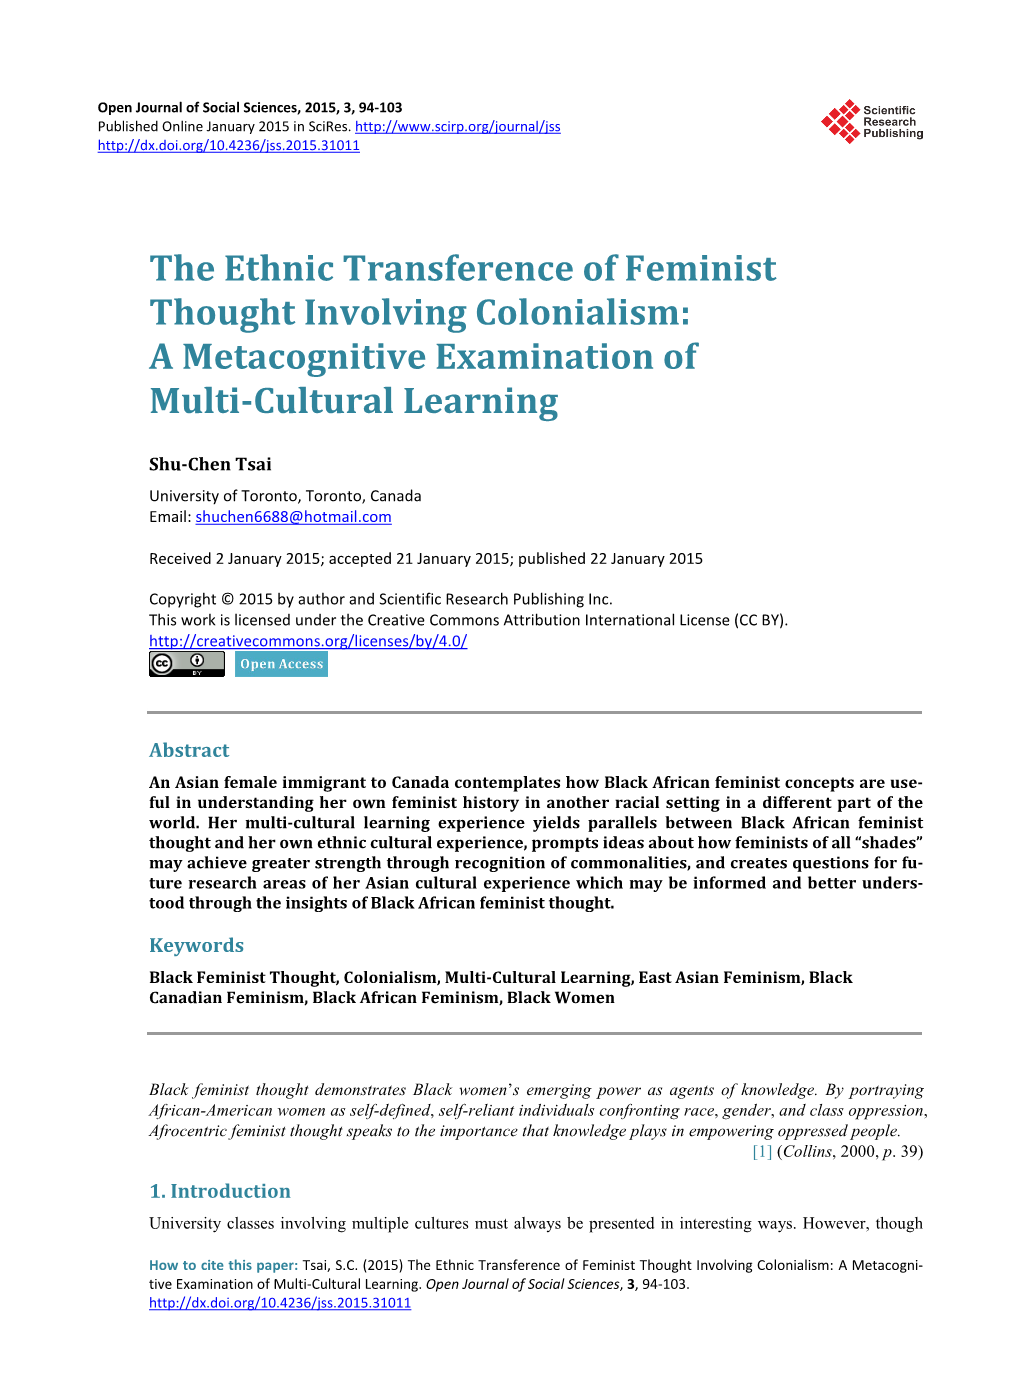 The Ethnic Transference of Feminist Thought Involving Colonialism: a Metacognitive Examination of Multi-Cultural Learning